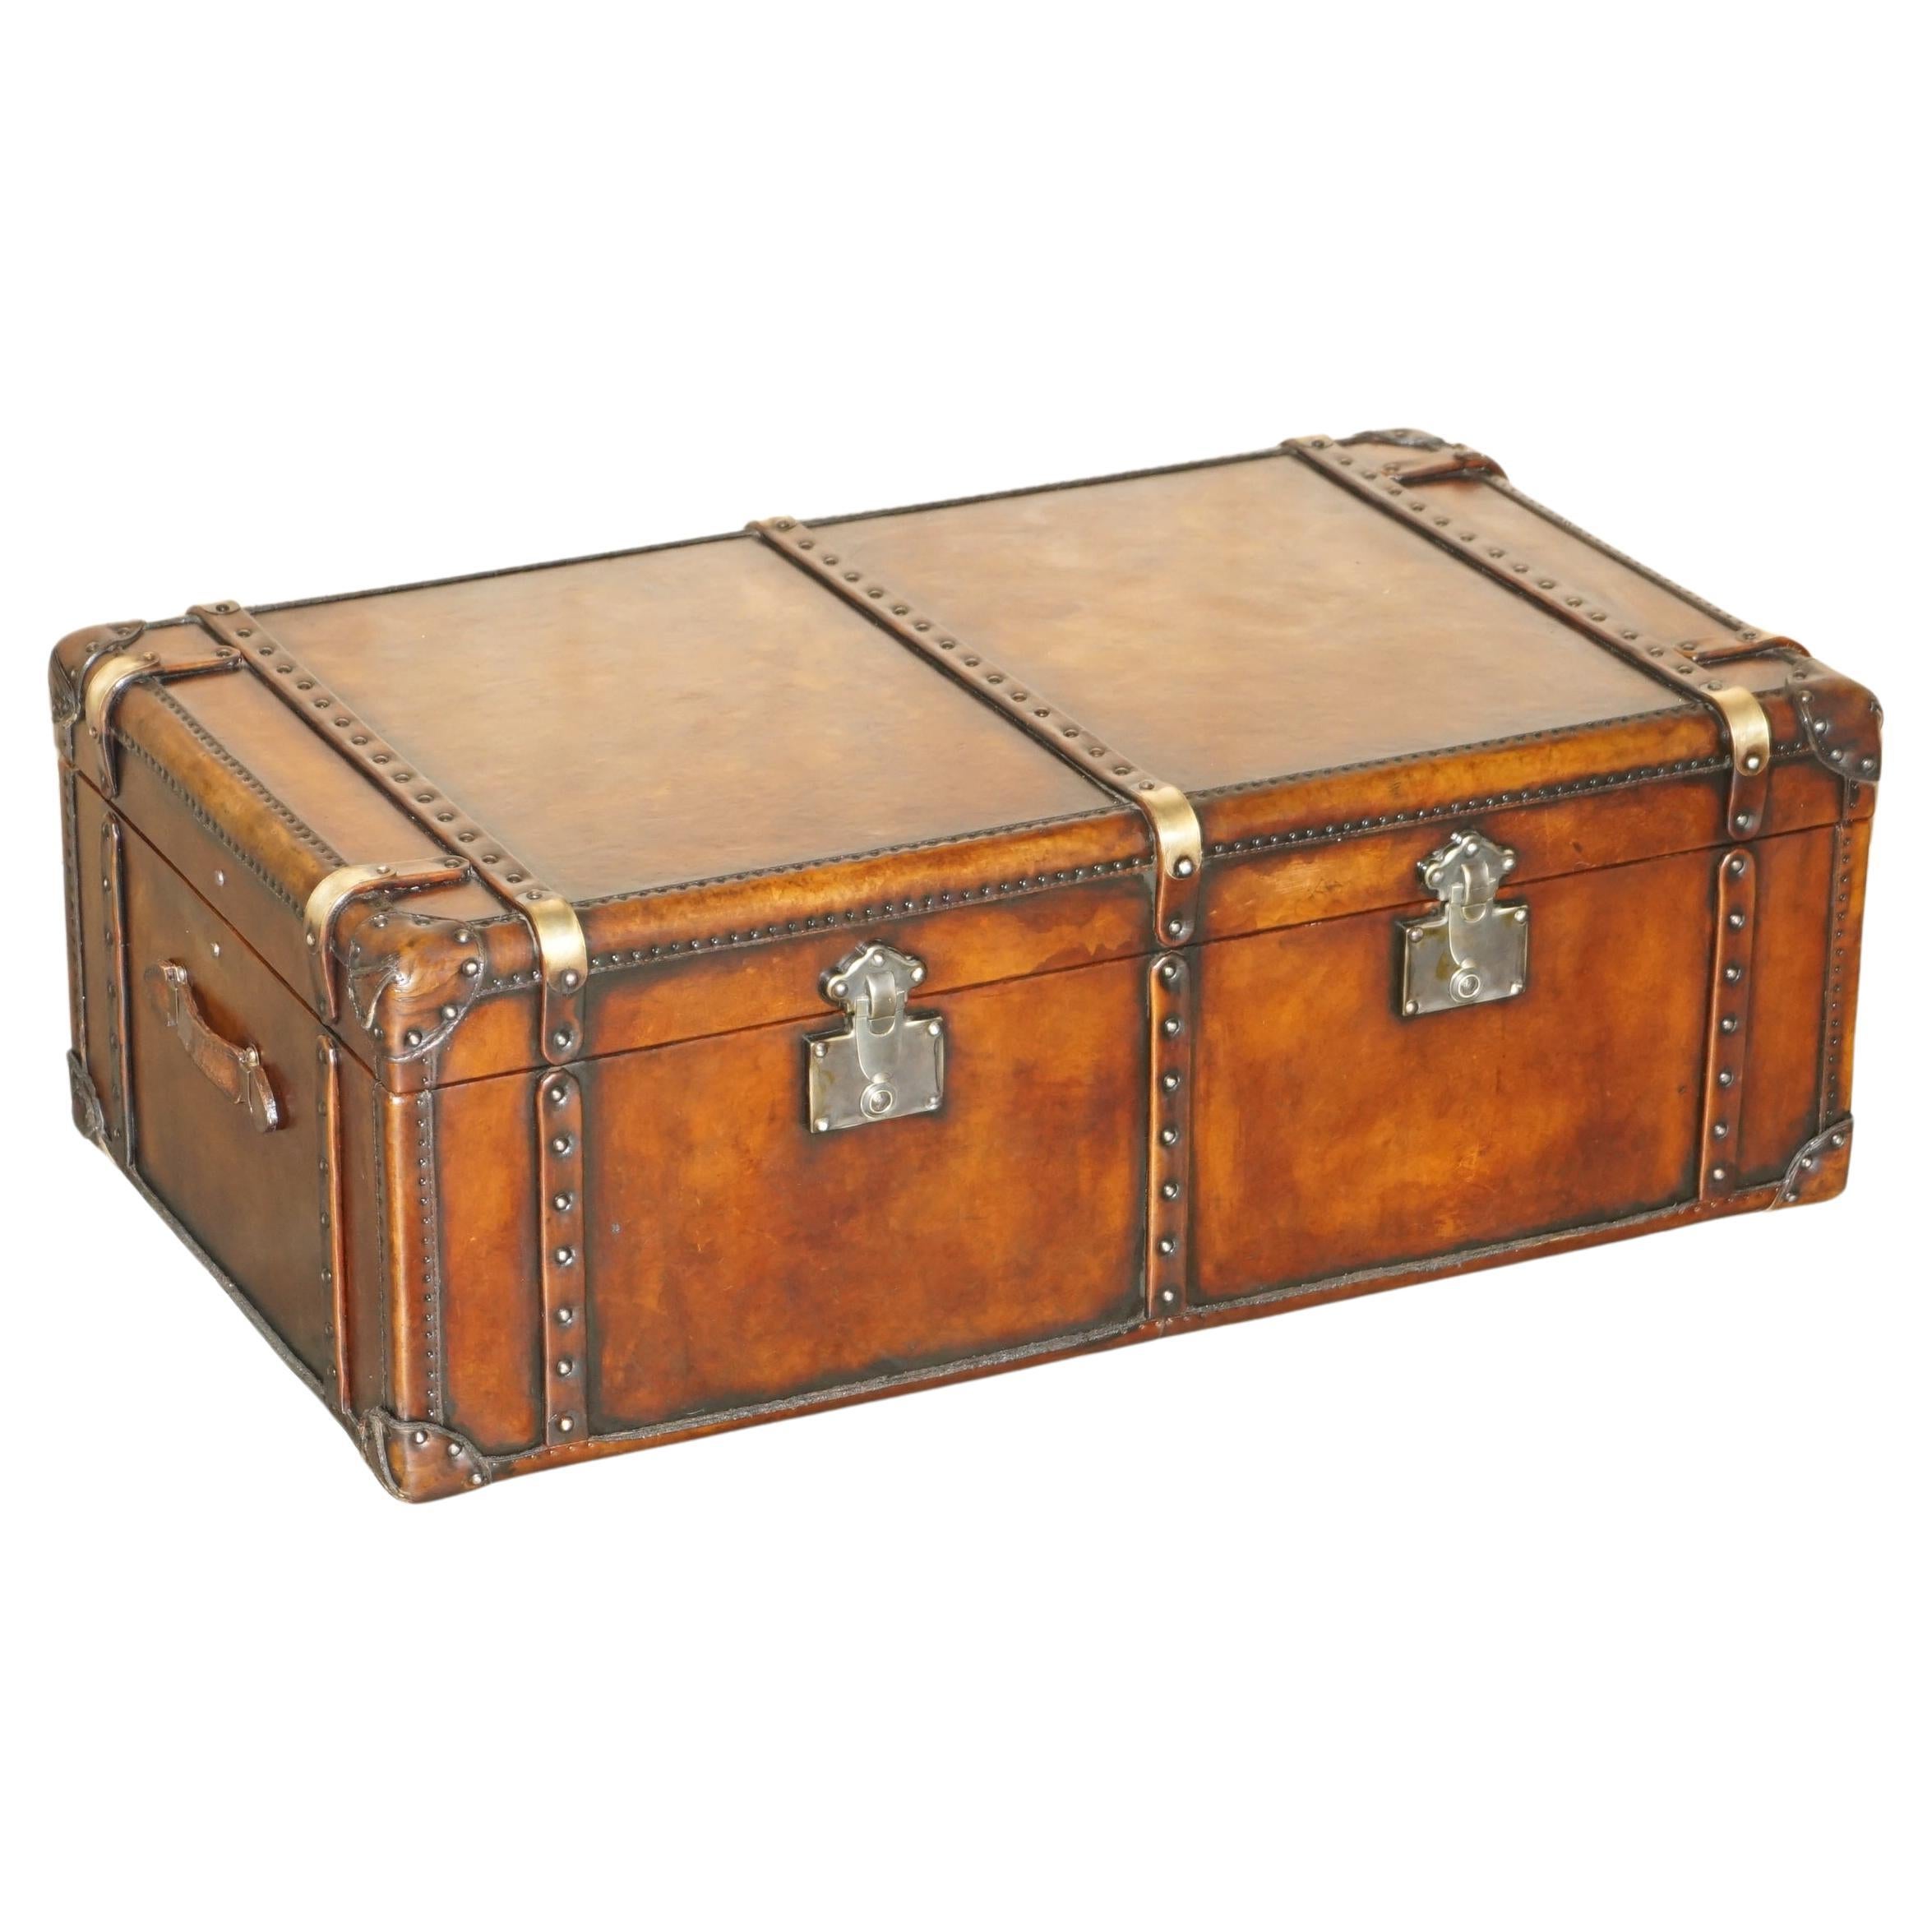 Royal House Antiques

Royal House Antiques is delighted to offer for sale this absolutely stunning, fully restored, hand dyed brown leather storage trunk coffee table 

Please note the delivery fee listed is just a guide, it covers within the M25